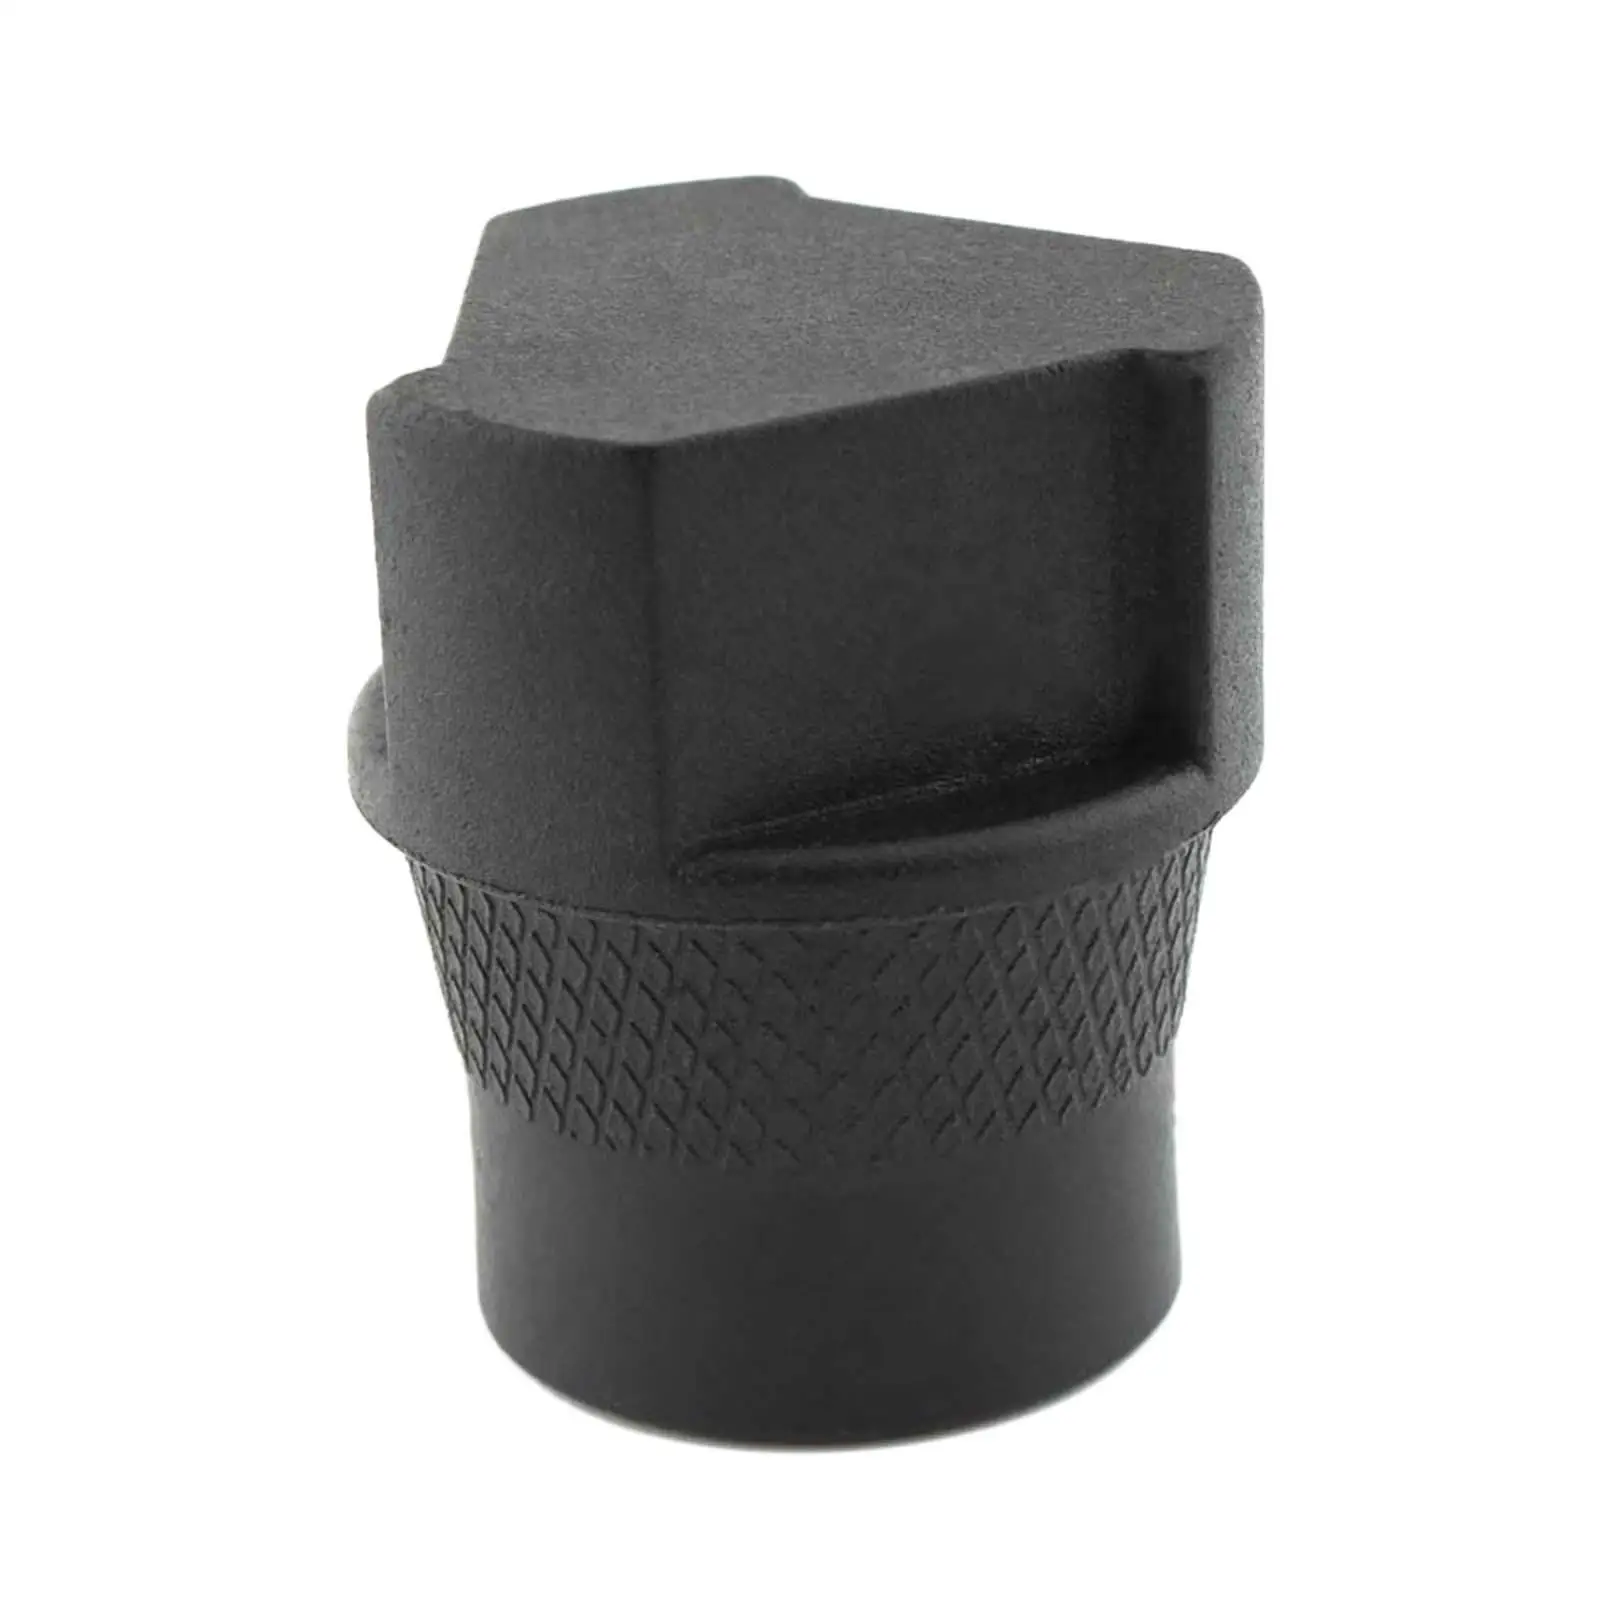 Oil Filter Wrench Cap Removal Tool for BMW /Adventure R1250RT